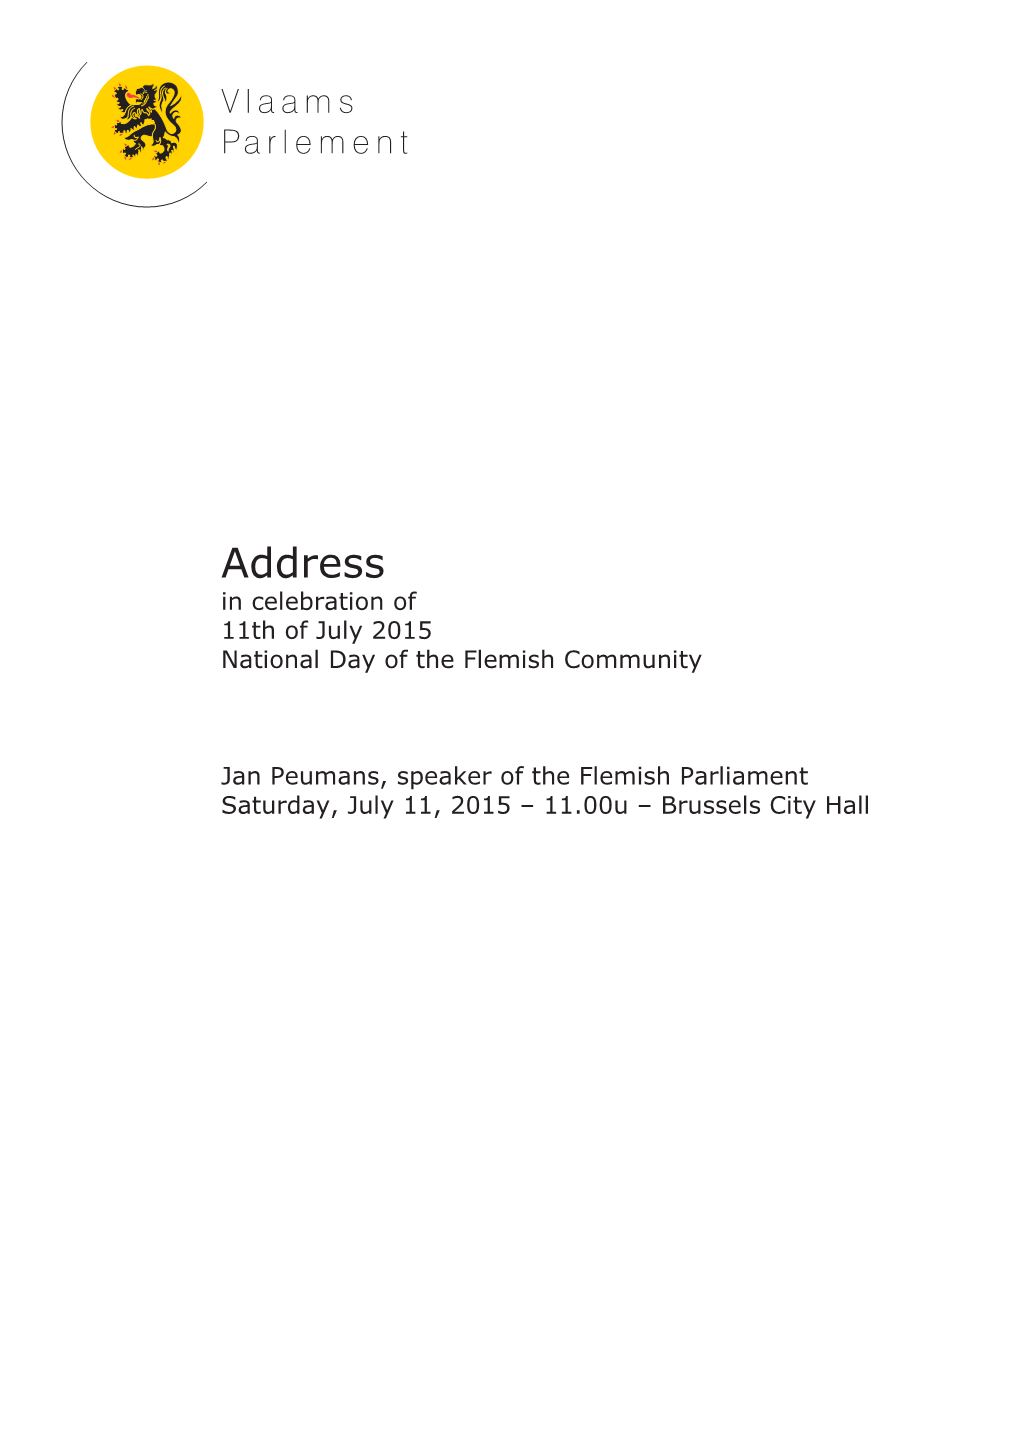 Address in Celebration of 11Th of July 2015 National Day of the Flemish Community